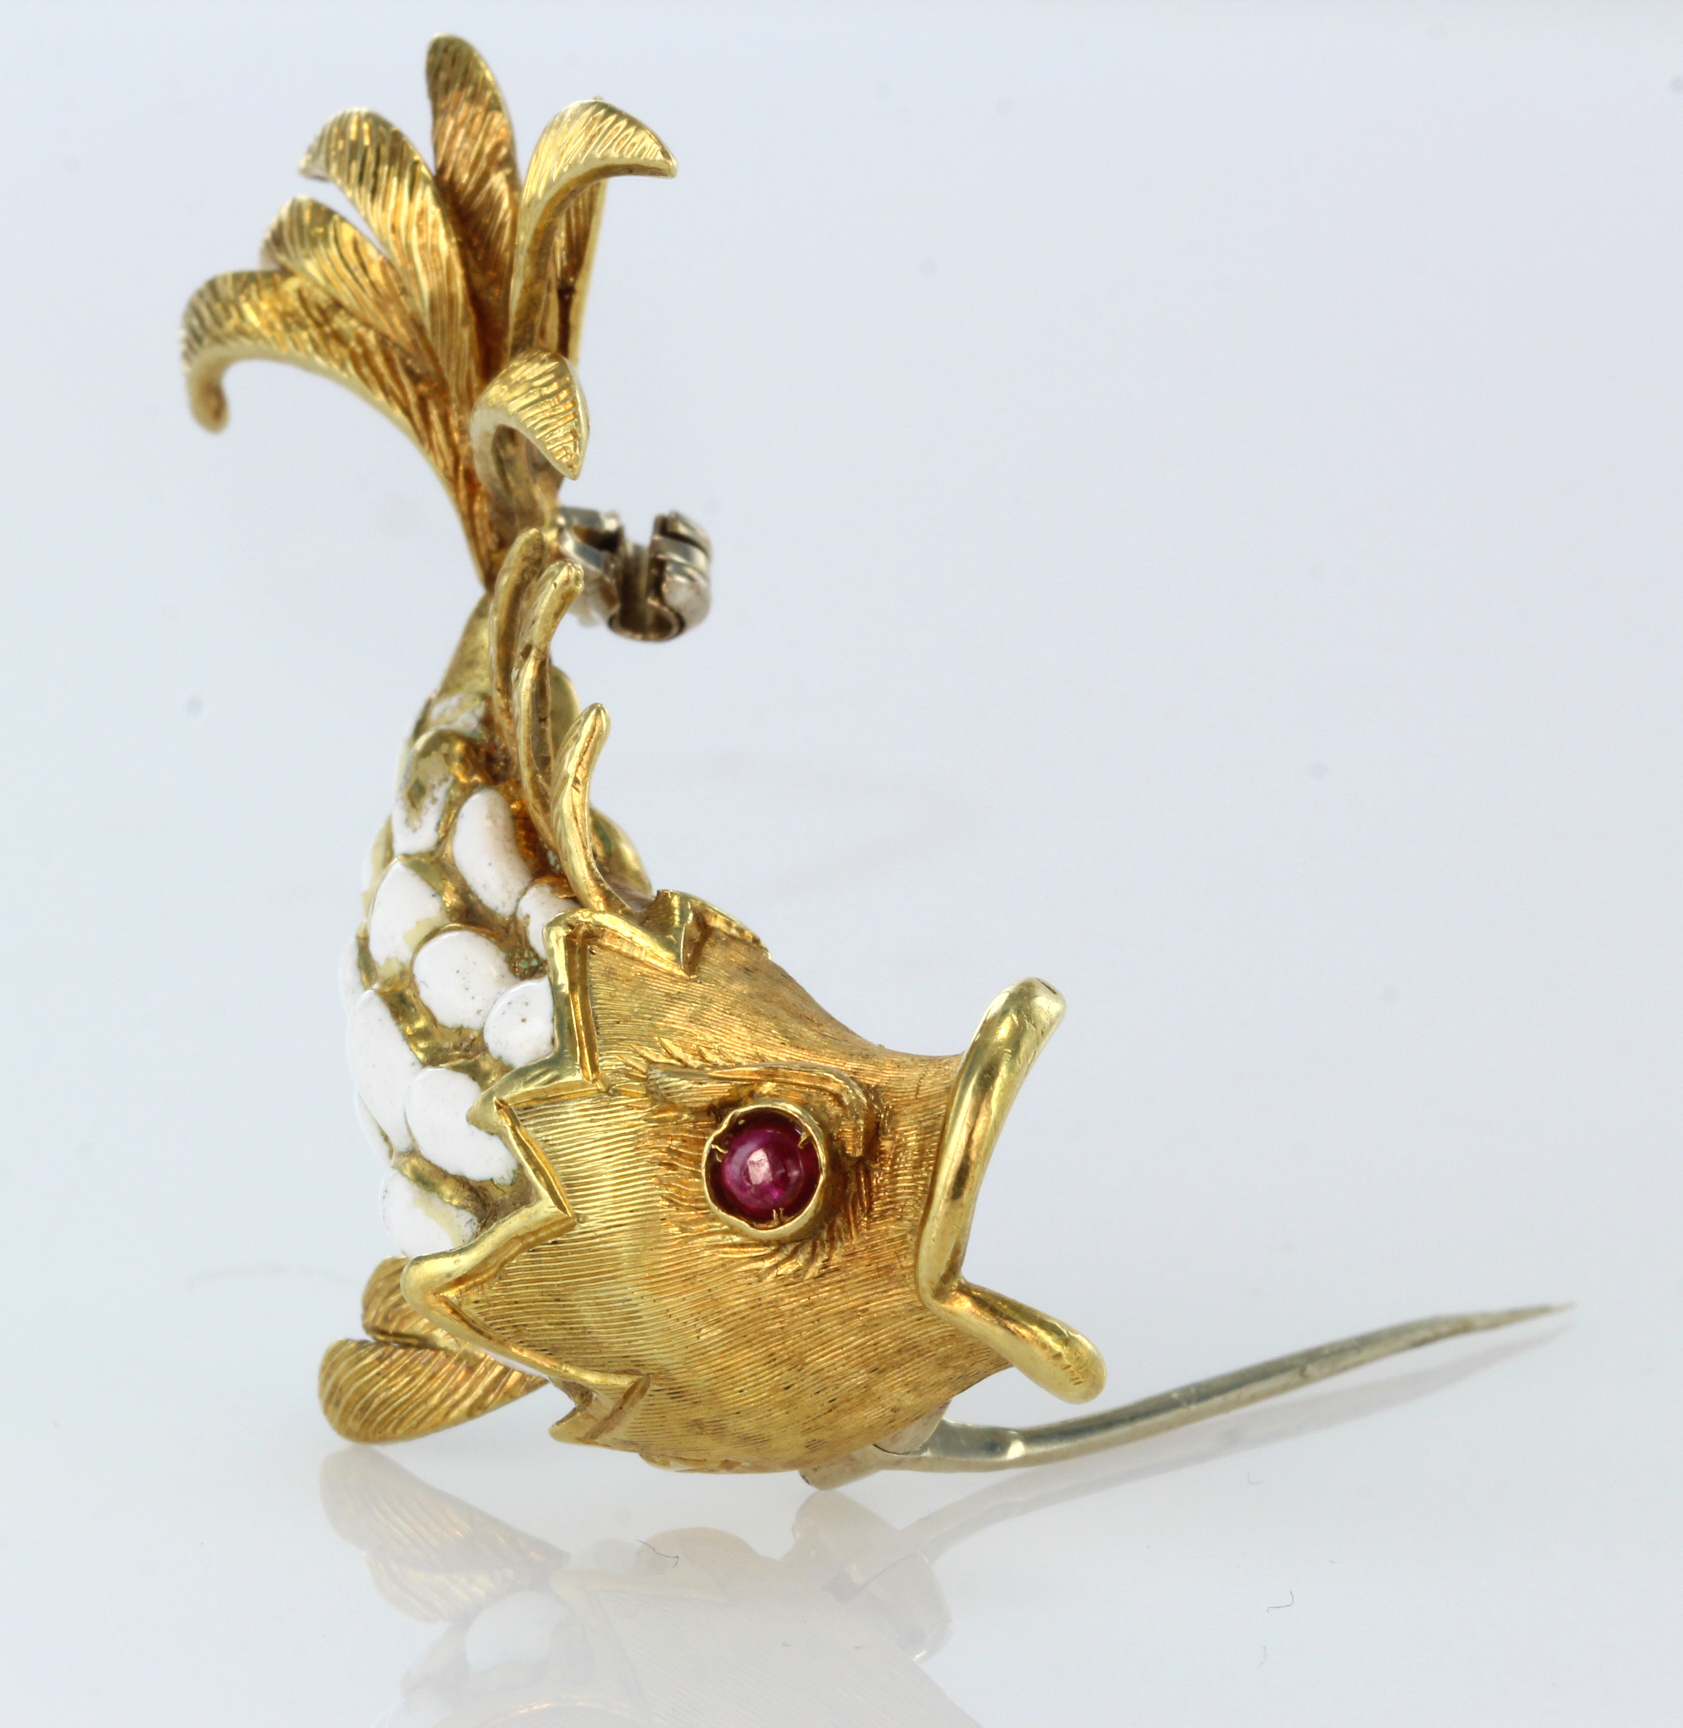 18ct yellow gold brooch in the shape of a leaping fish with a ruby eye and white enamel scales, - Image 2 of 2